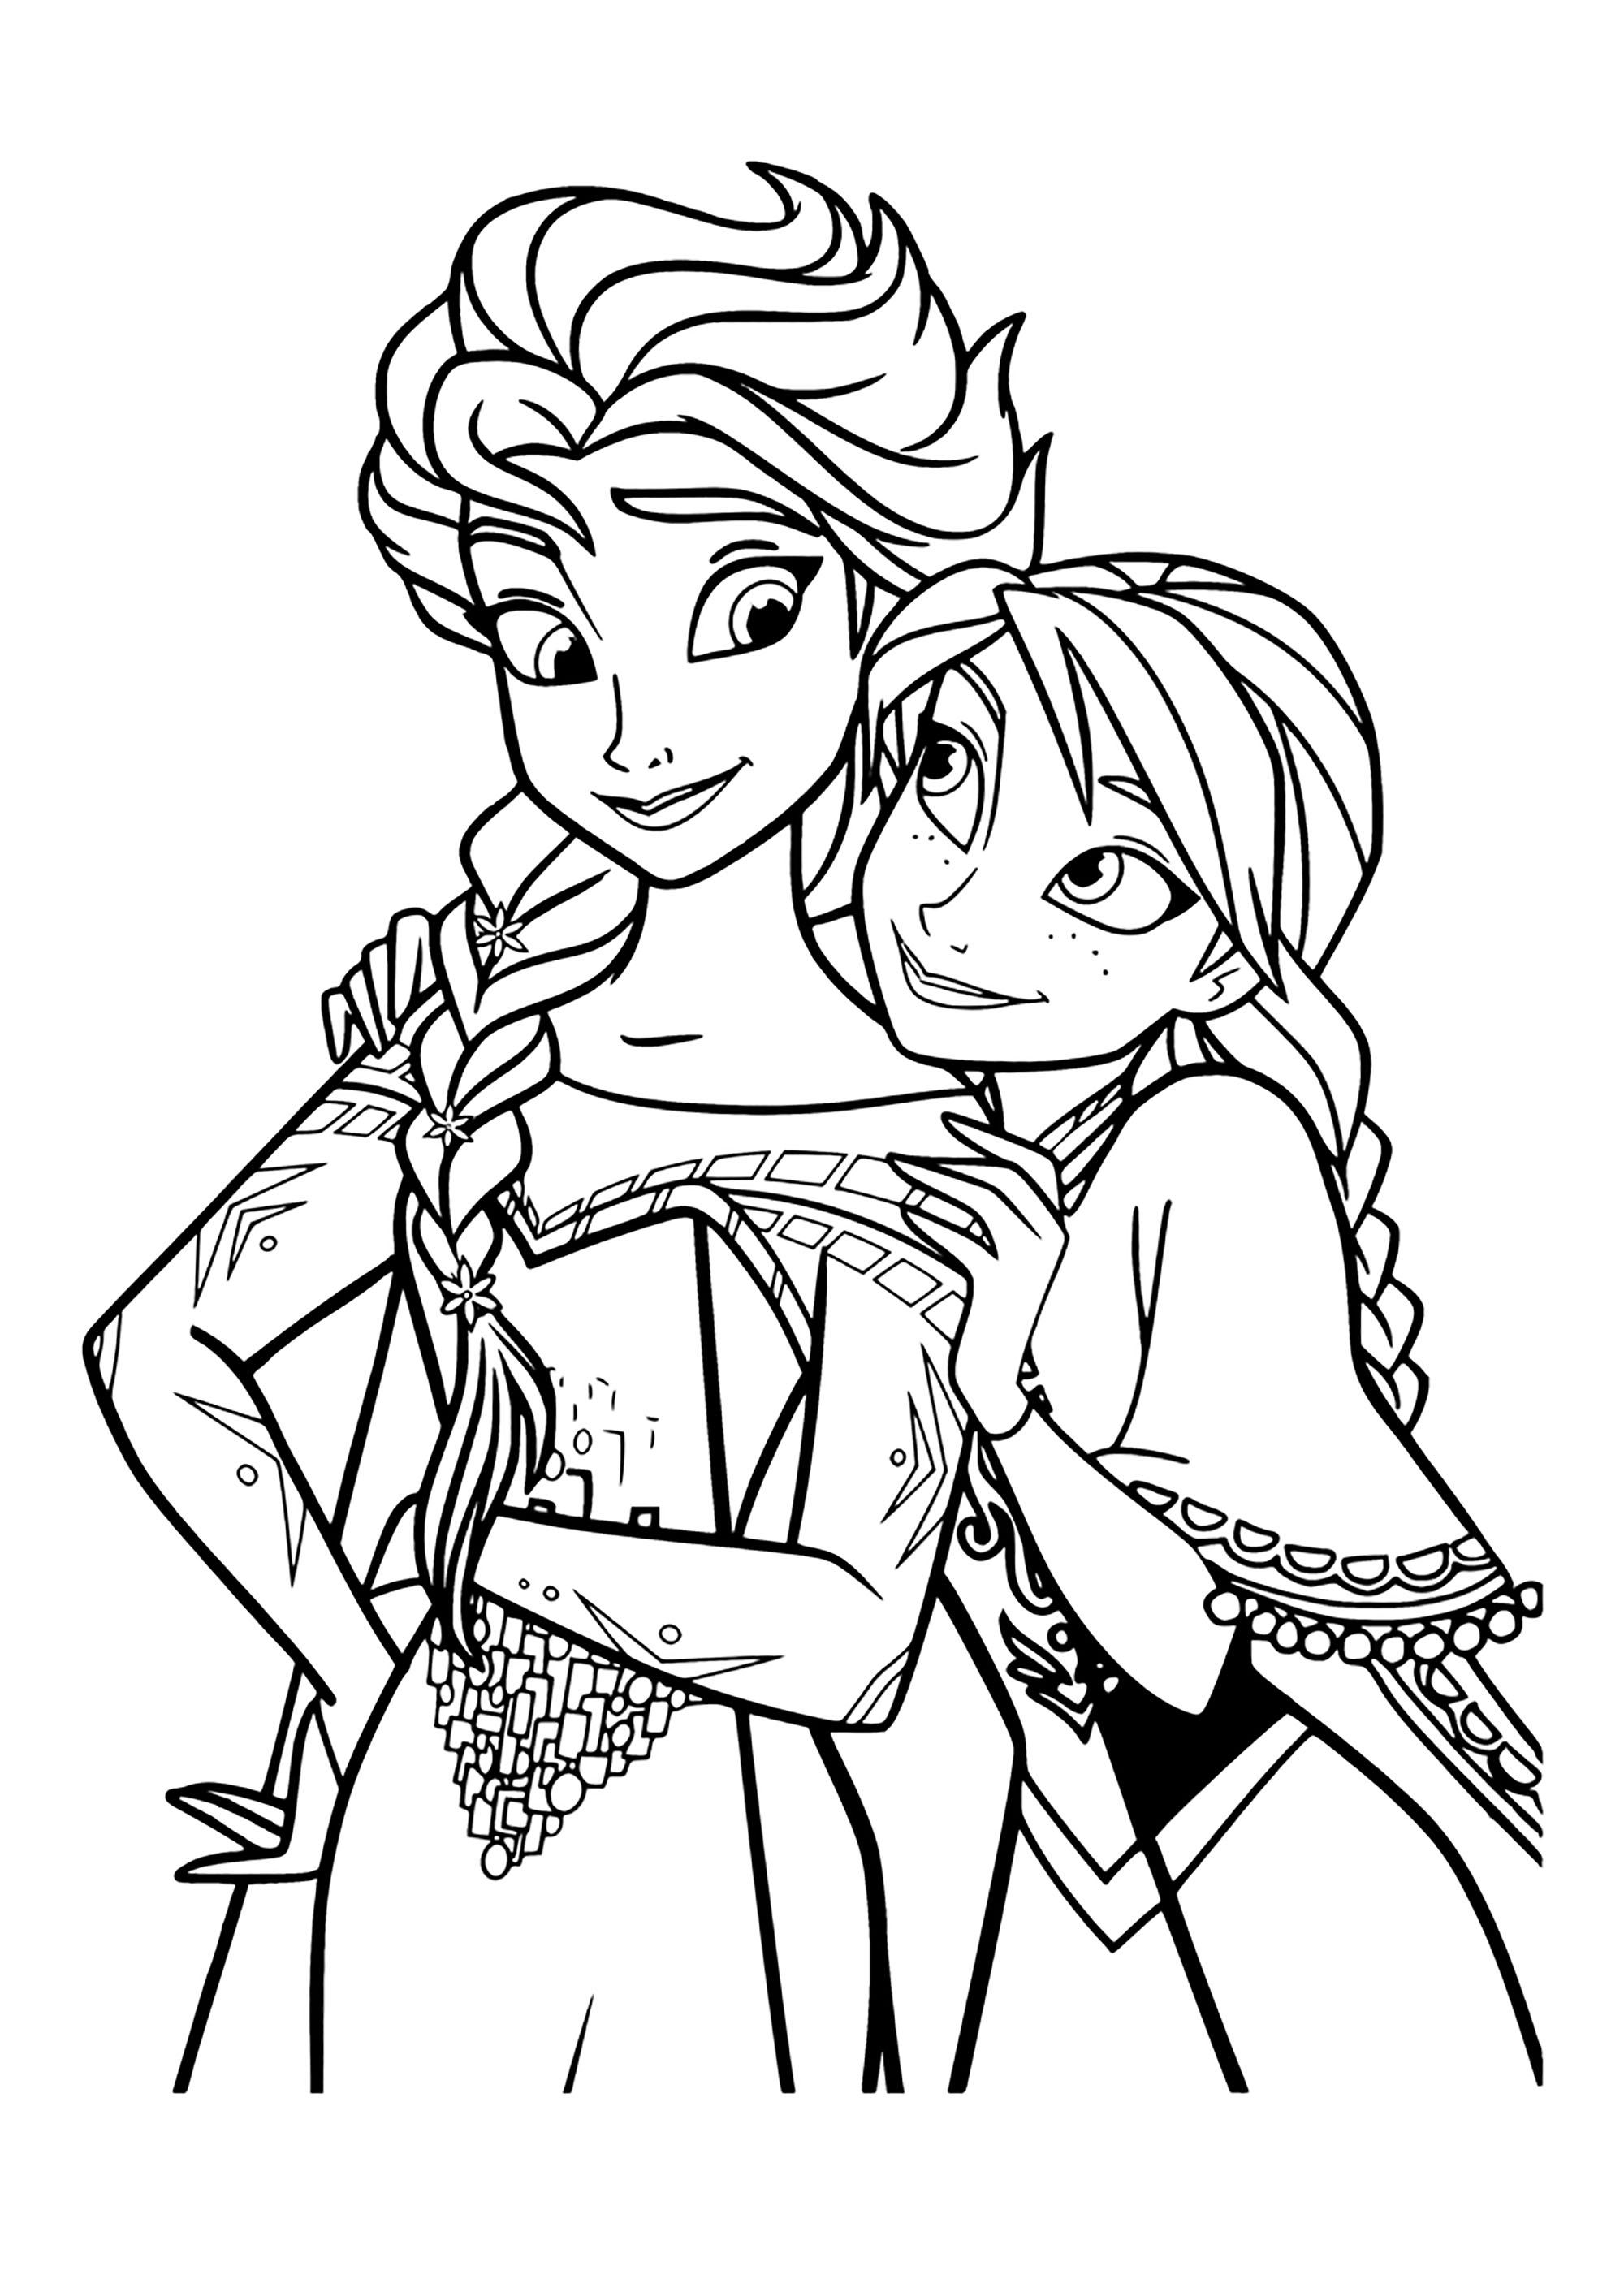  Coloring  Pages  For Kids Frozen  2 We are happy to present 